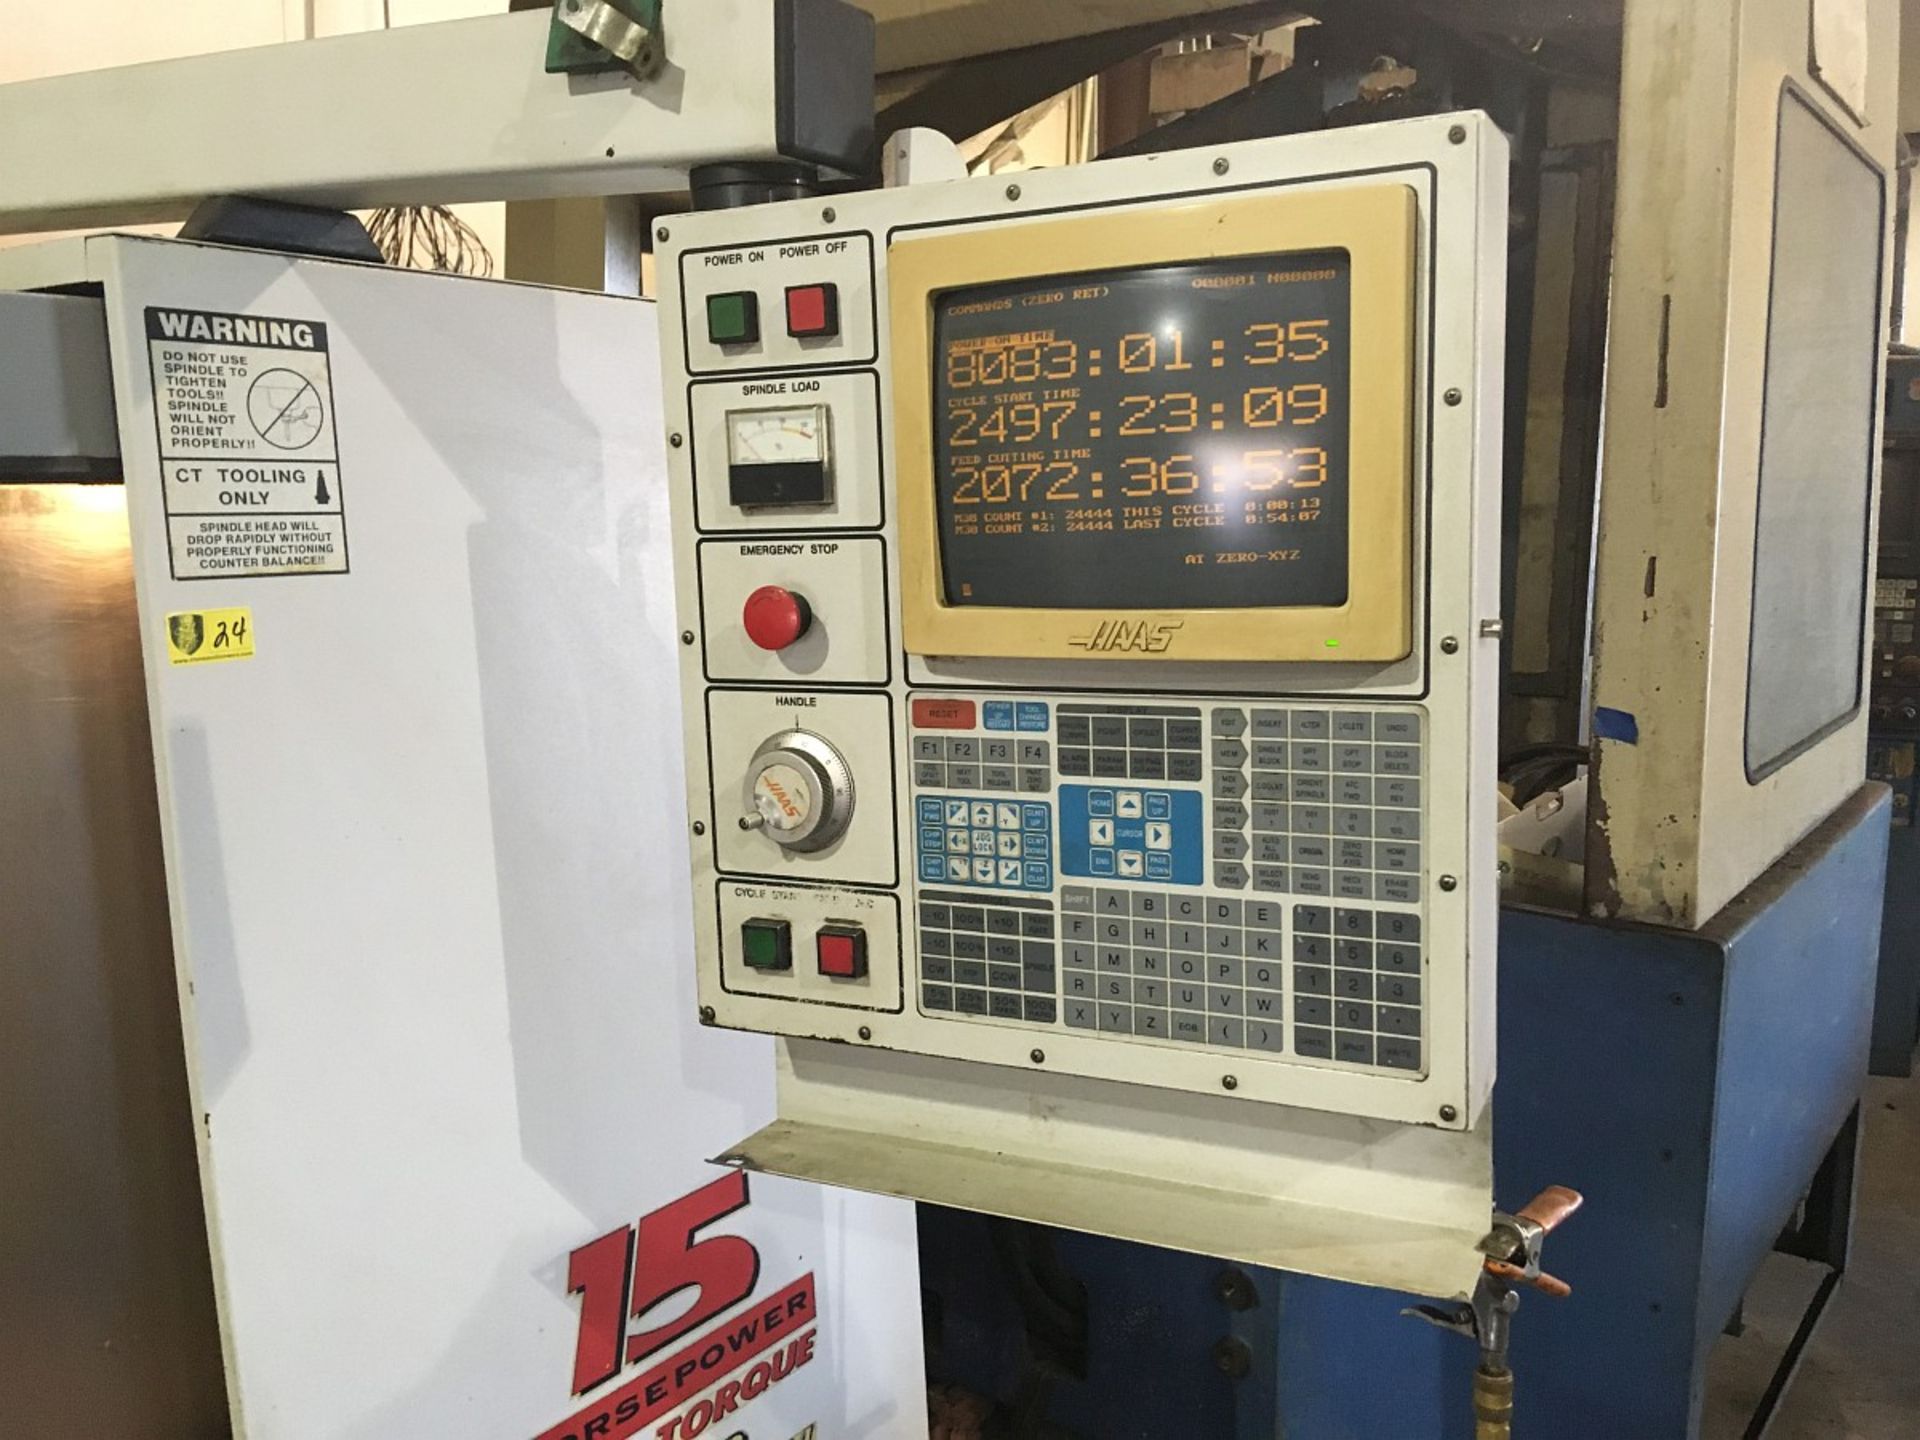 Haas VF3 Vertical CNC Mill, X= 40", Y= 20", Z= 25", 15 HP High Torque, 7,500 RPM, Cat 40 Taper - Image 2 of 12